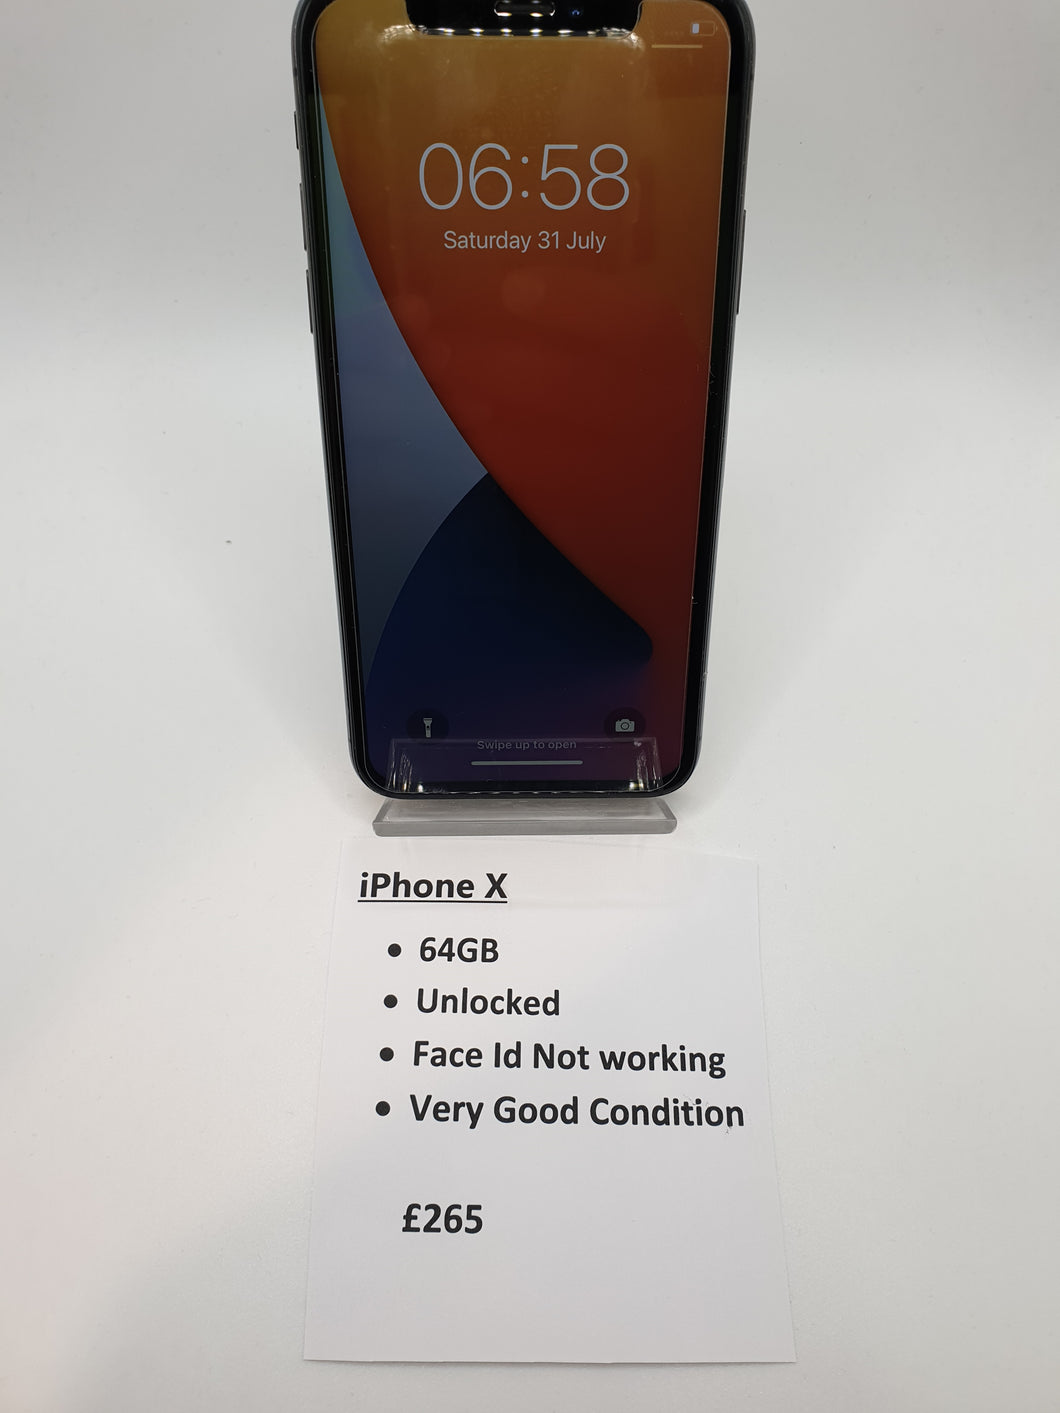 Apple iPhone X Black 64GB Unlocked Face id Not Working Very Good Condition Fully Tested